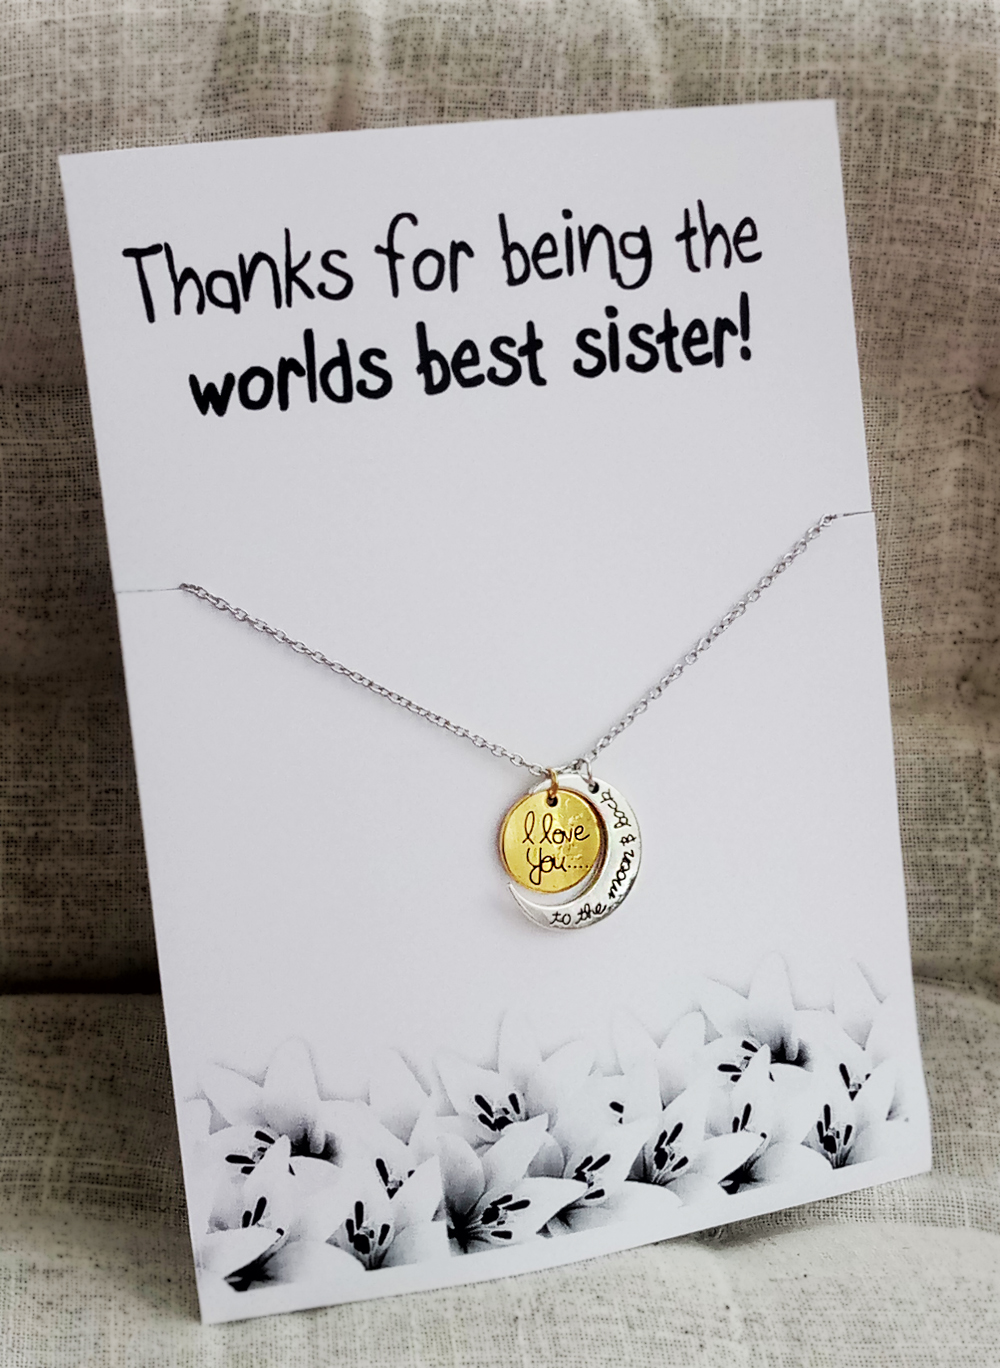 Thanks For Being The World Sister Love You Pendant Woman Fashion Gold-silver Toned Gift Chain Necklace